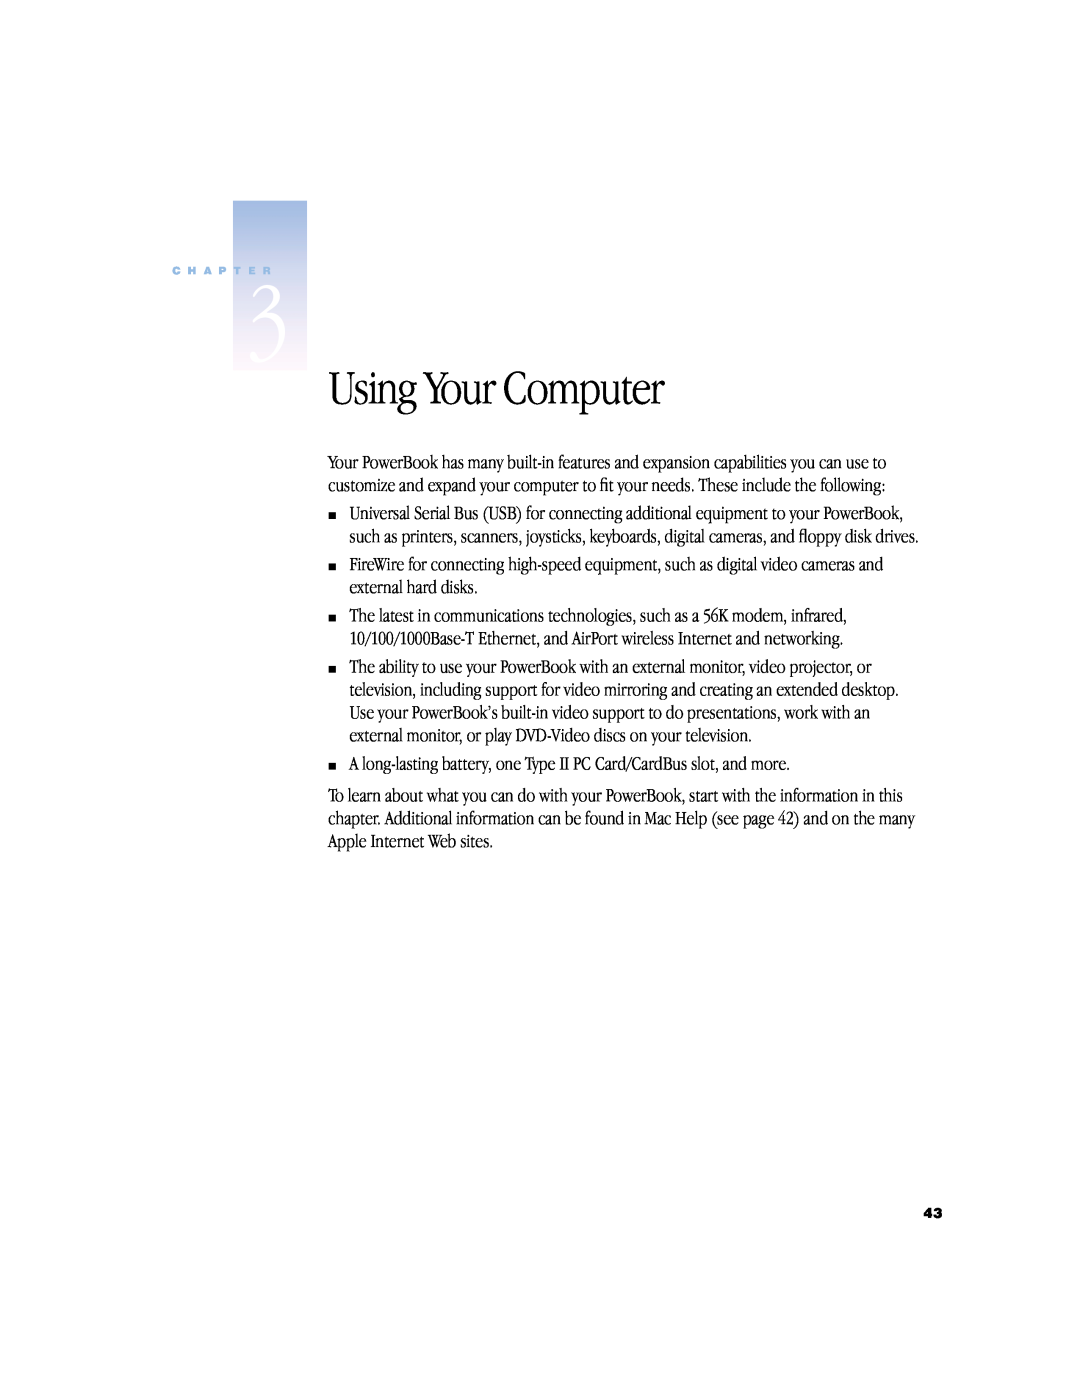 Apple powerbook g4 manual Using Your Computer 